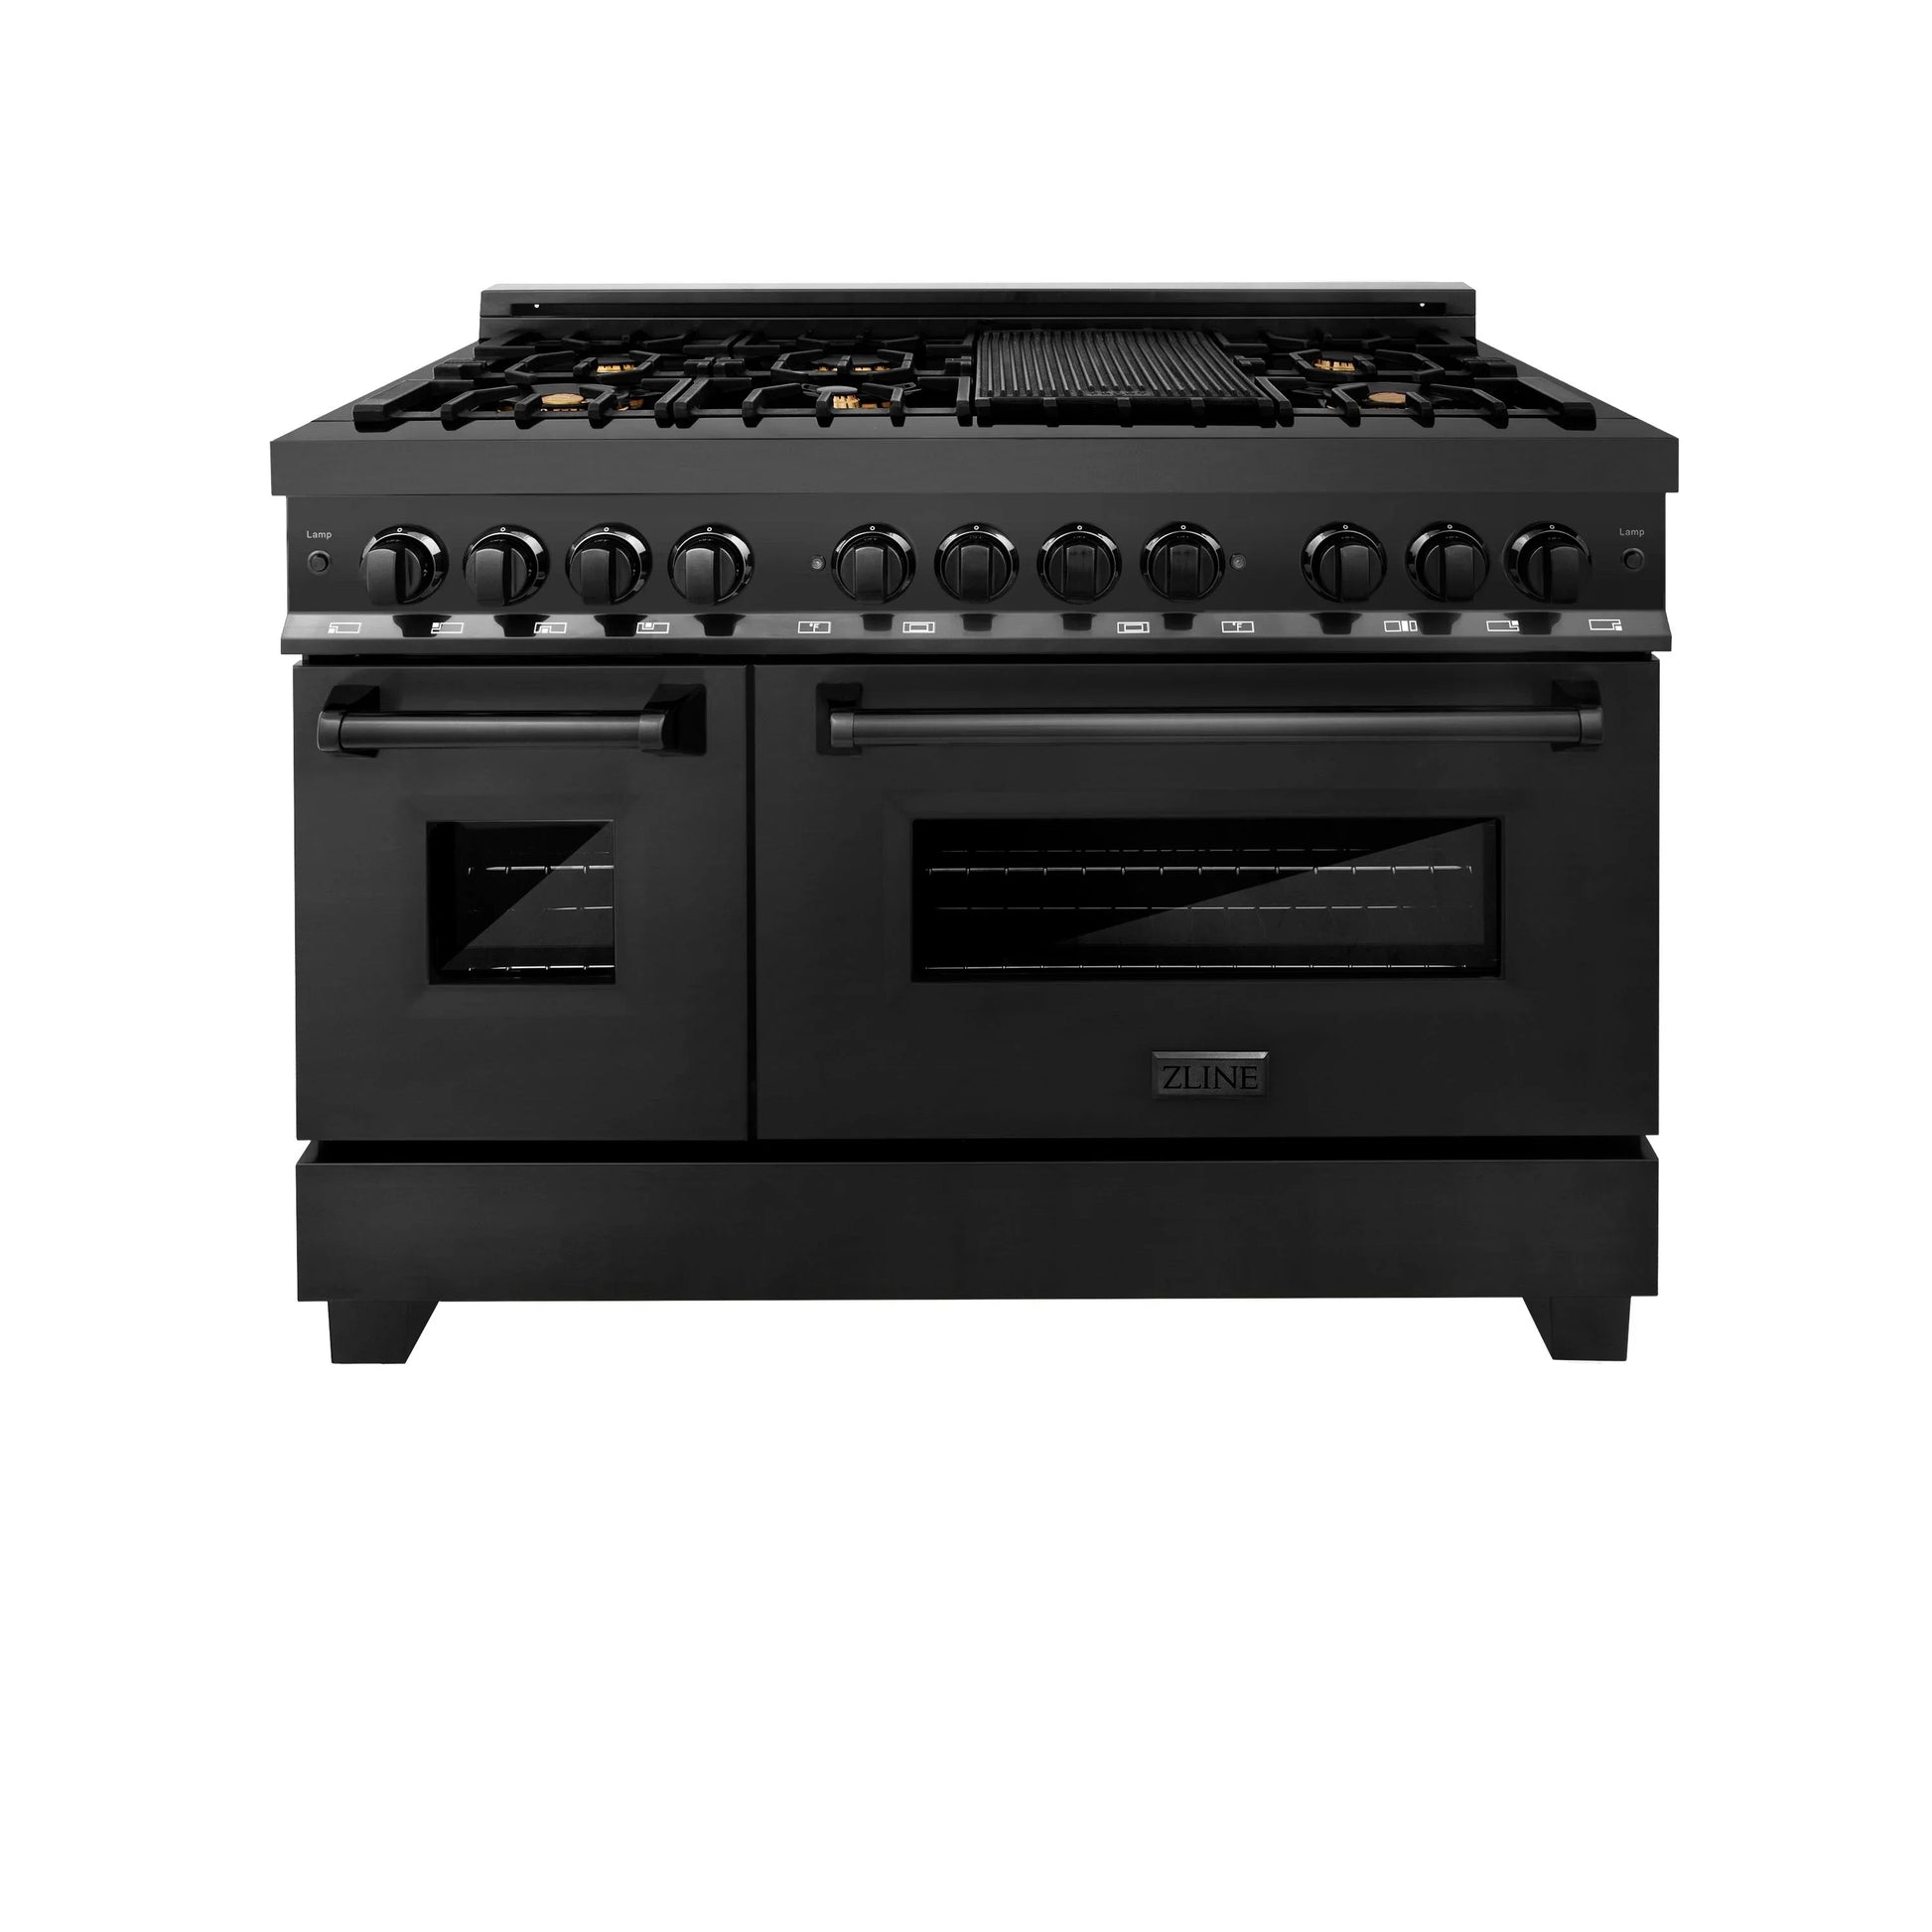 ZLINE 48" Dual Fuel Range - Black Stainless Steel with Brass Burners, Gas Stove, and Electric Oven